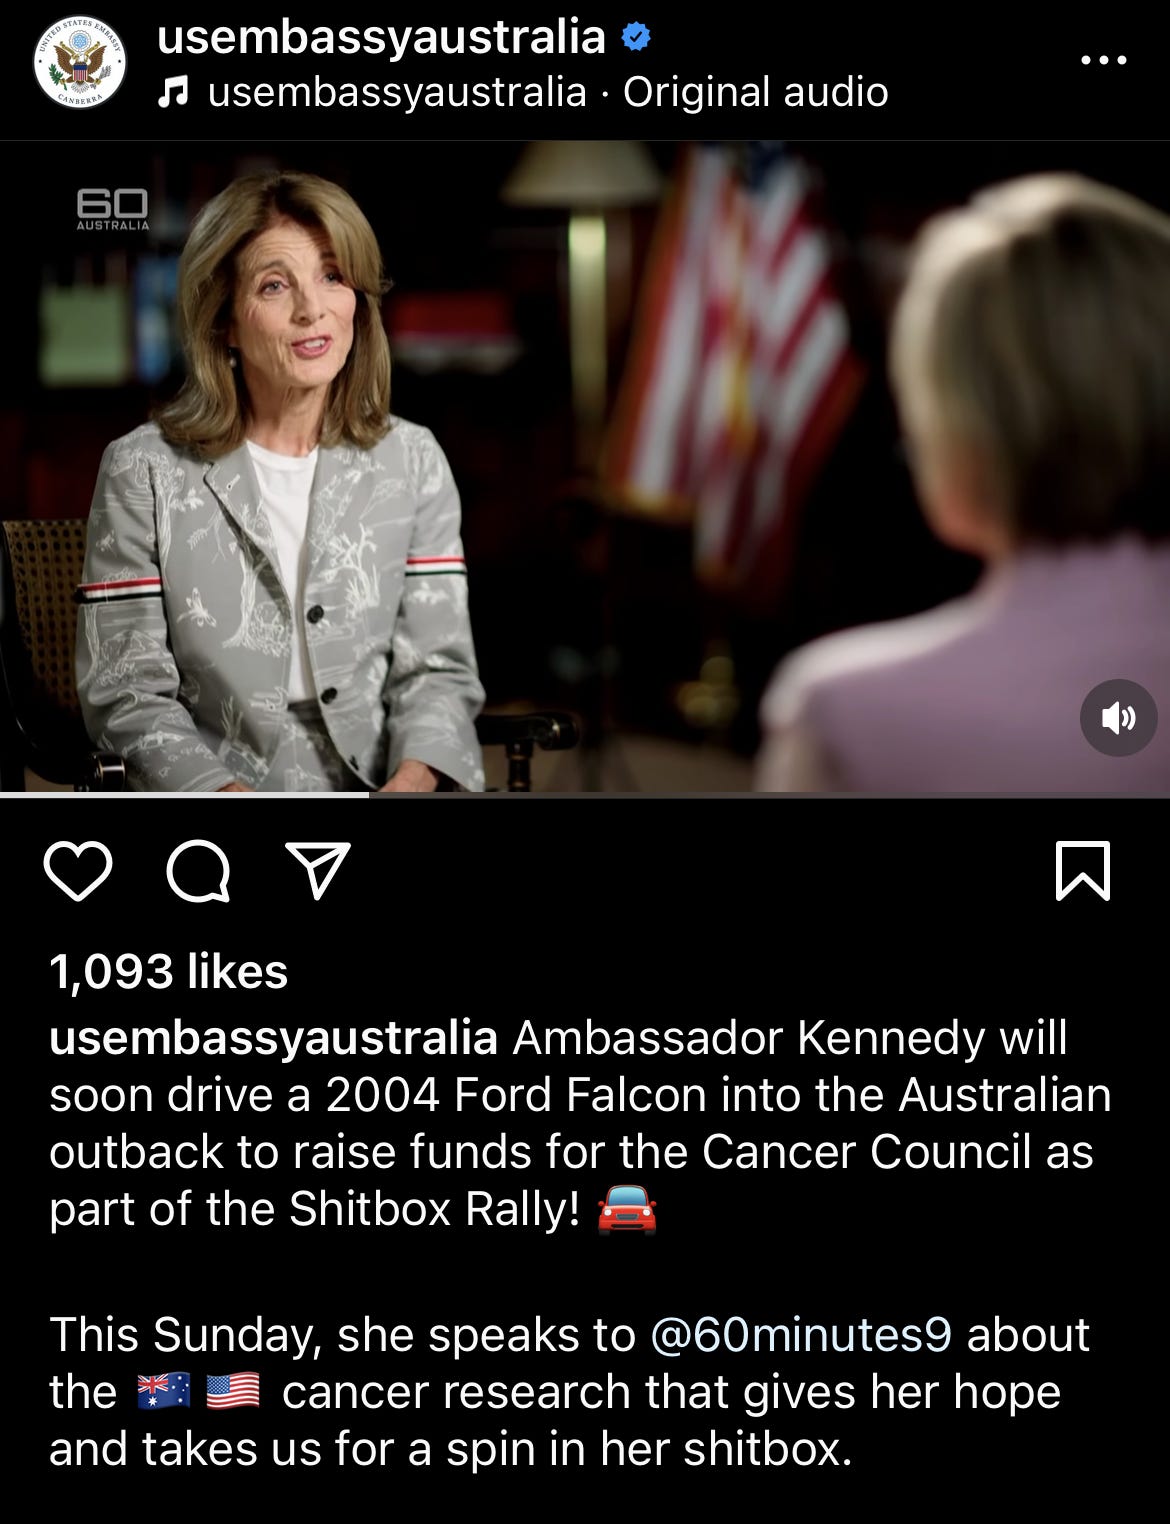 Ambassador Kennedy talking about taking part in the "Shitbox rally" in Australia